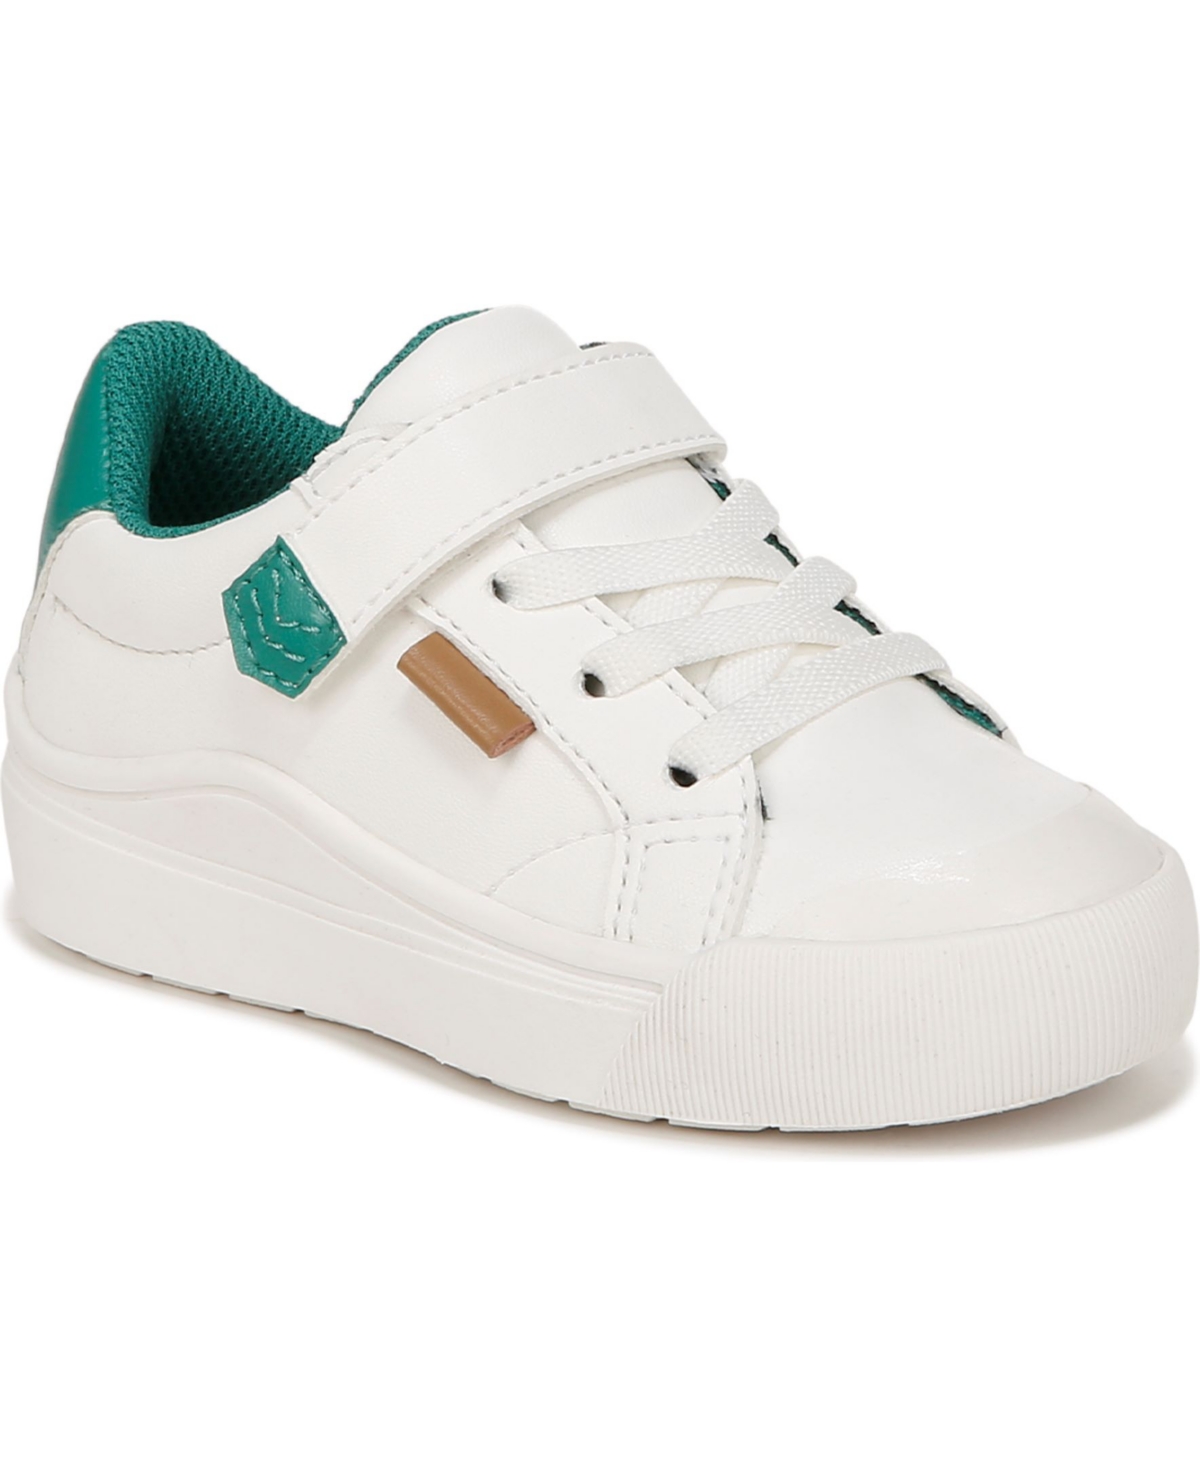 Dr. Scholl's Kids' Time Off Toddler Sneakers In White Green